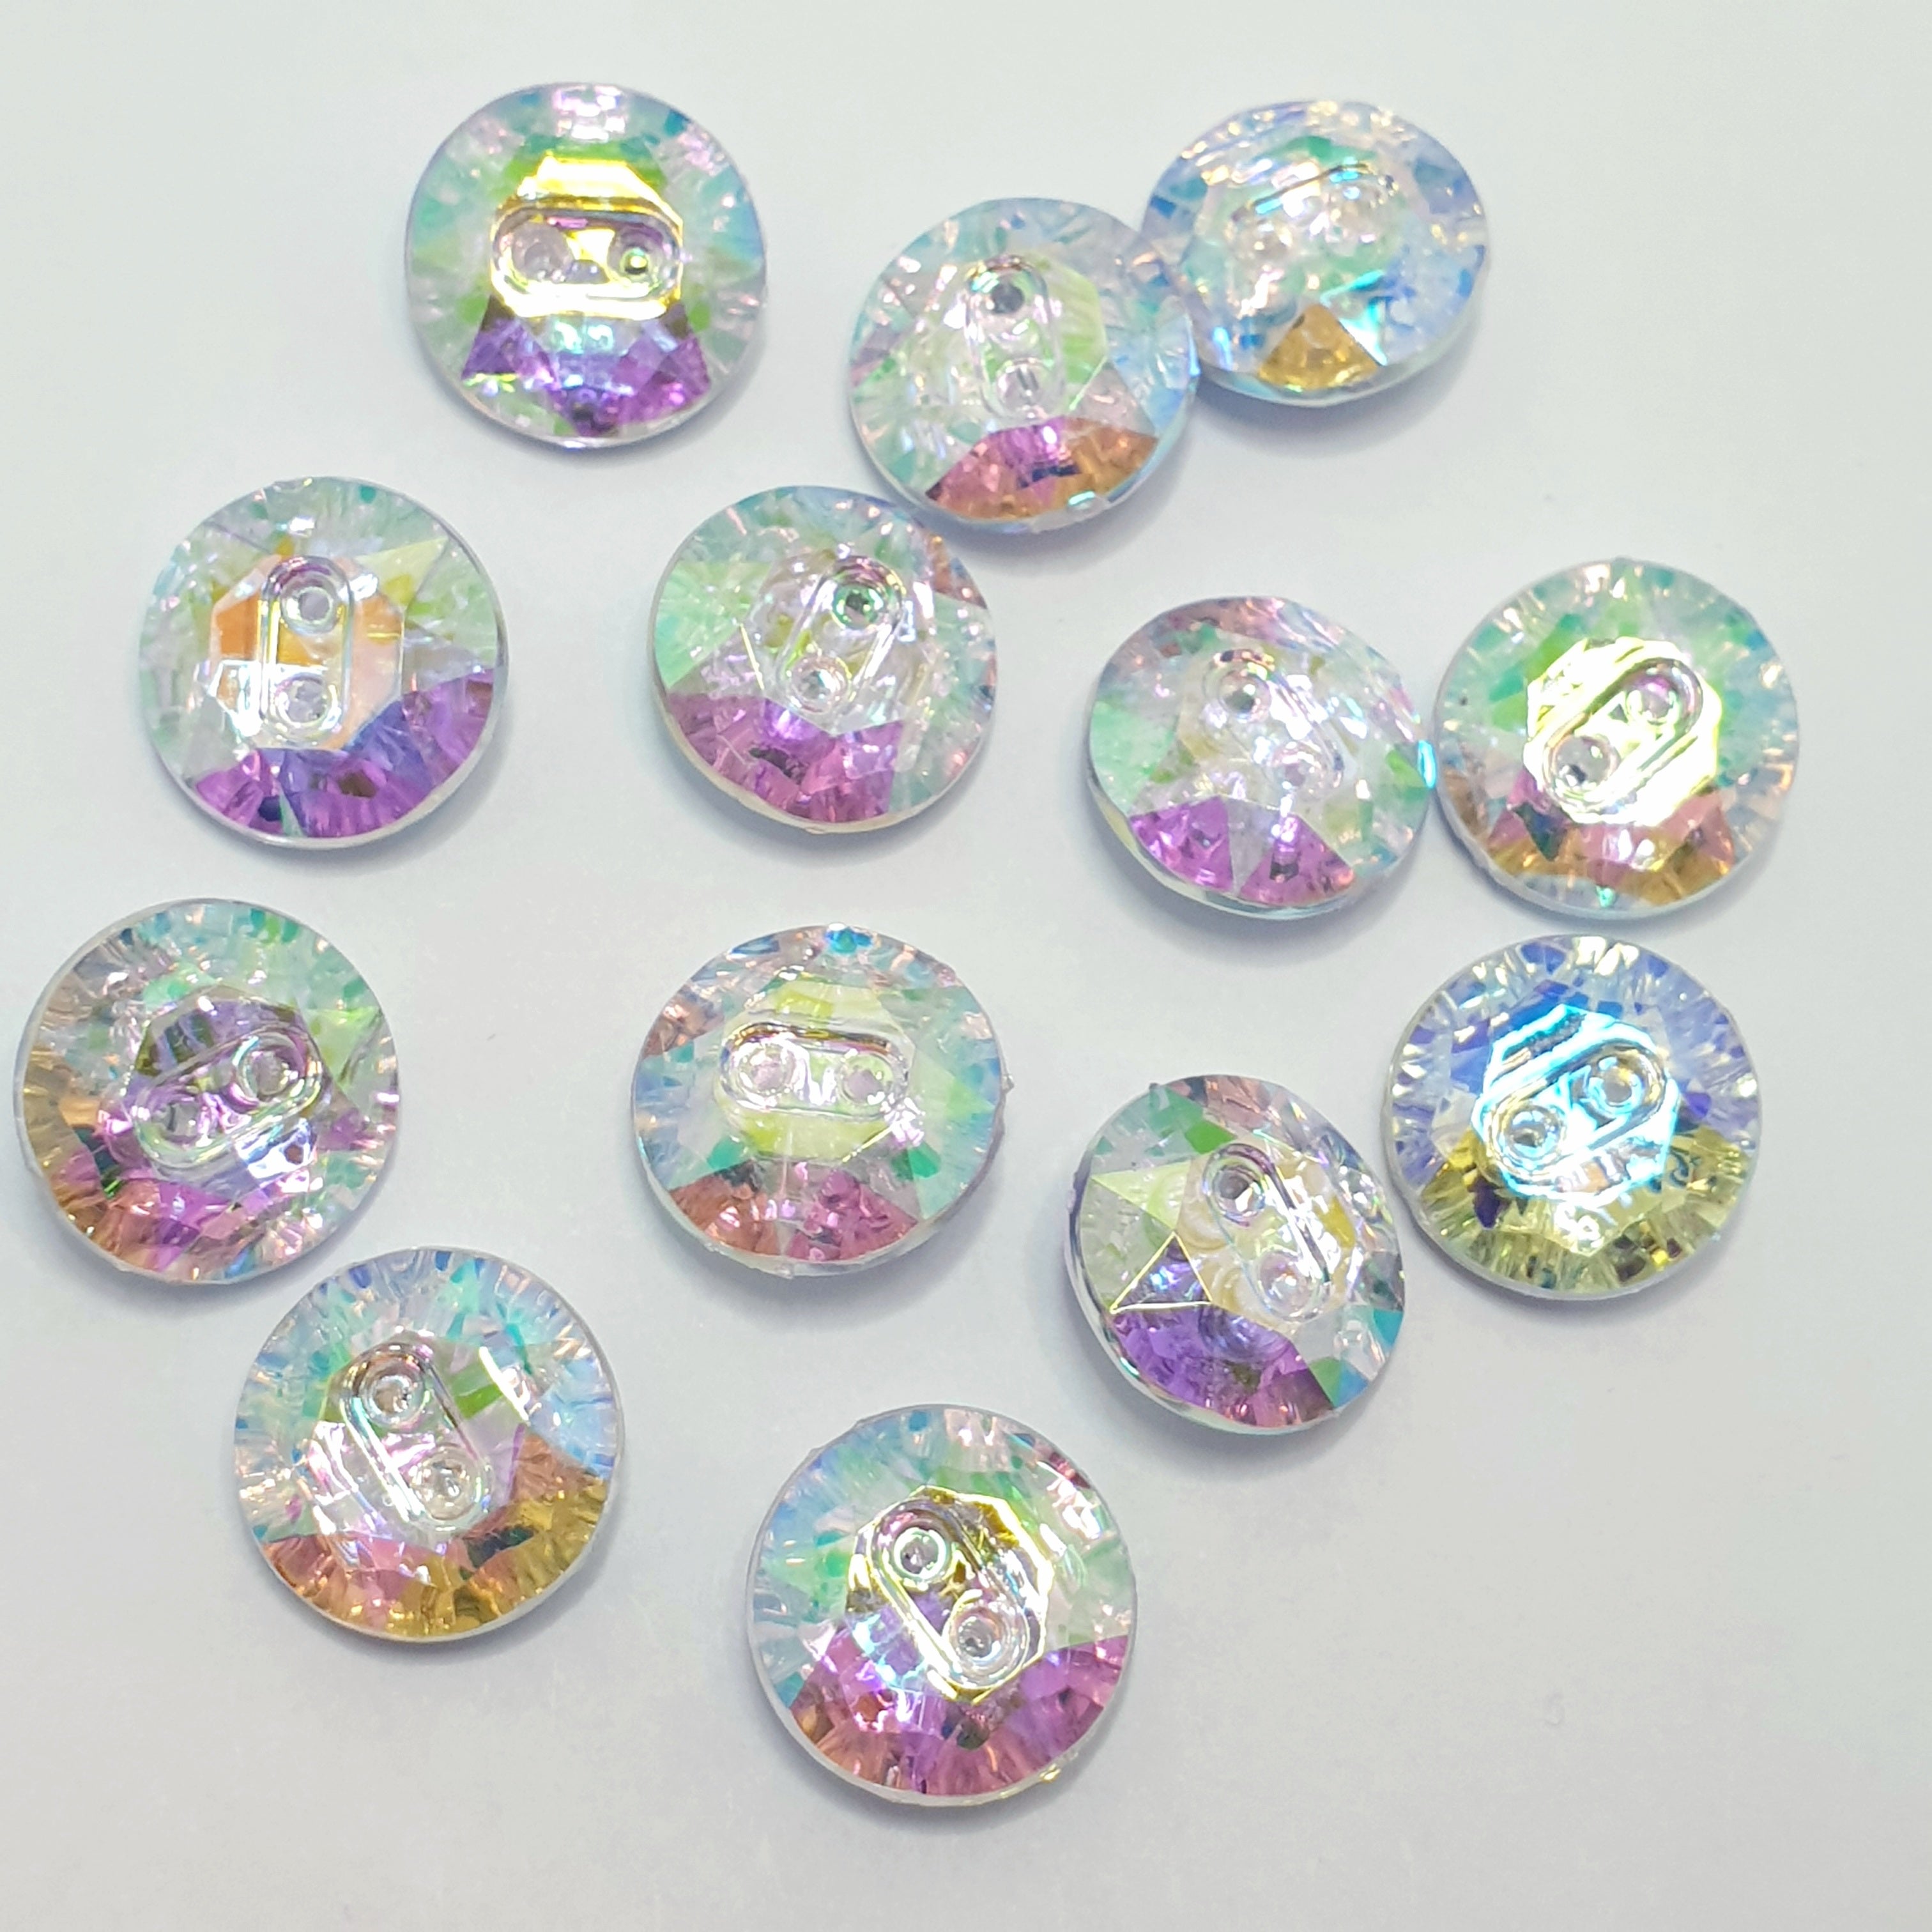 MajorCrafts 20pcs 15mm Crystal AB Faceted 2 Holes Round Acrylic Sewing Buttons